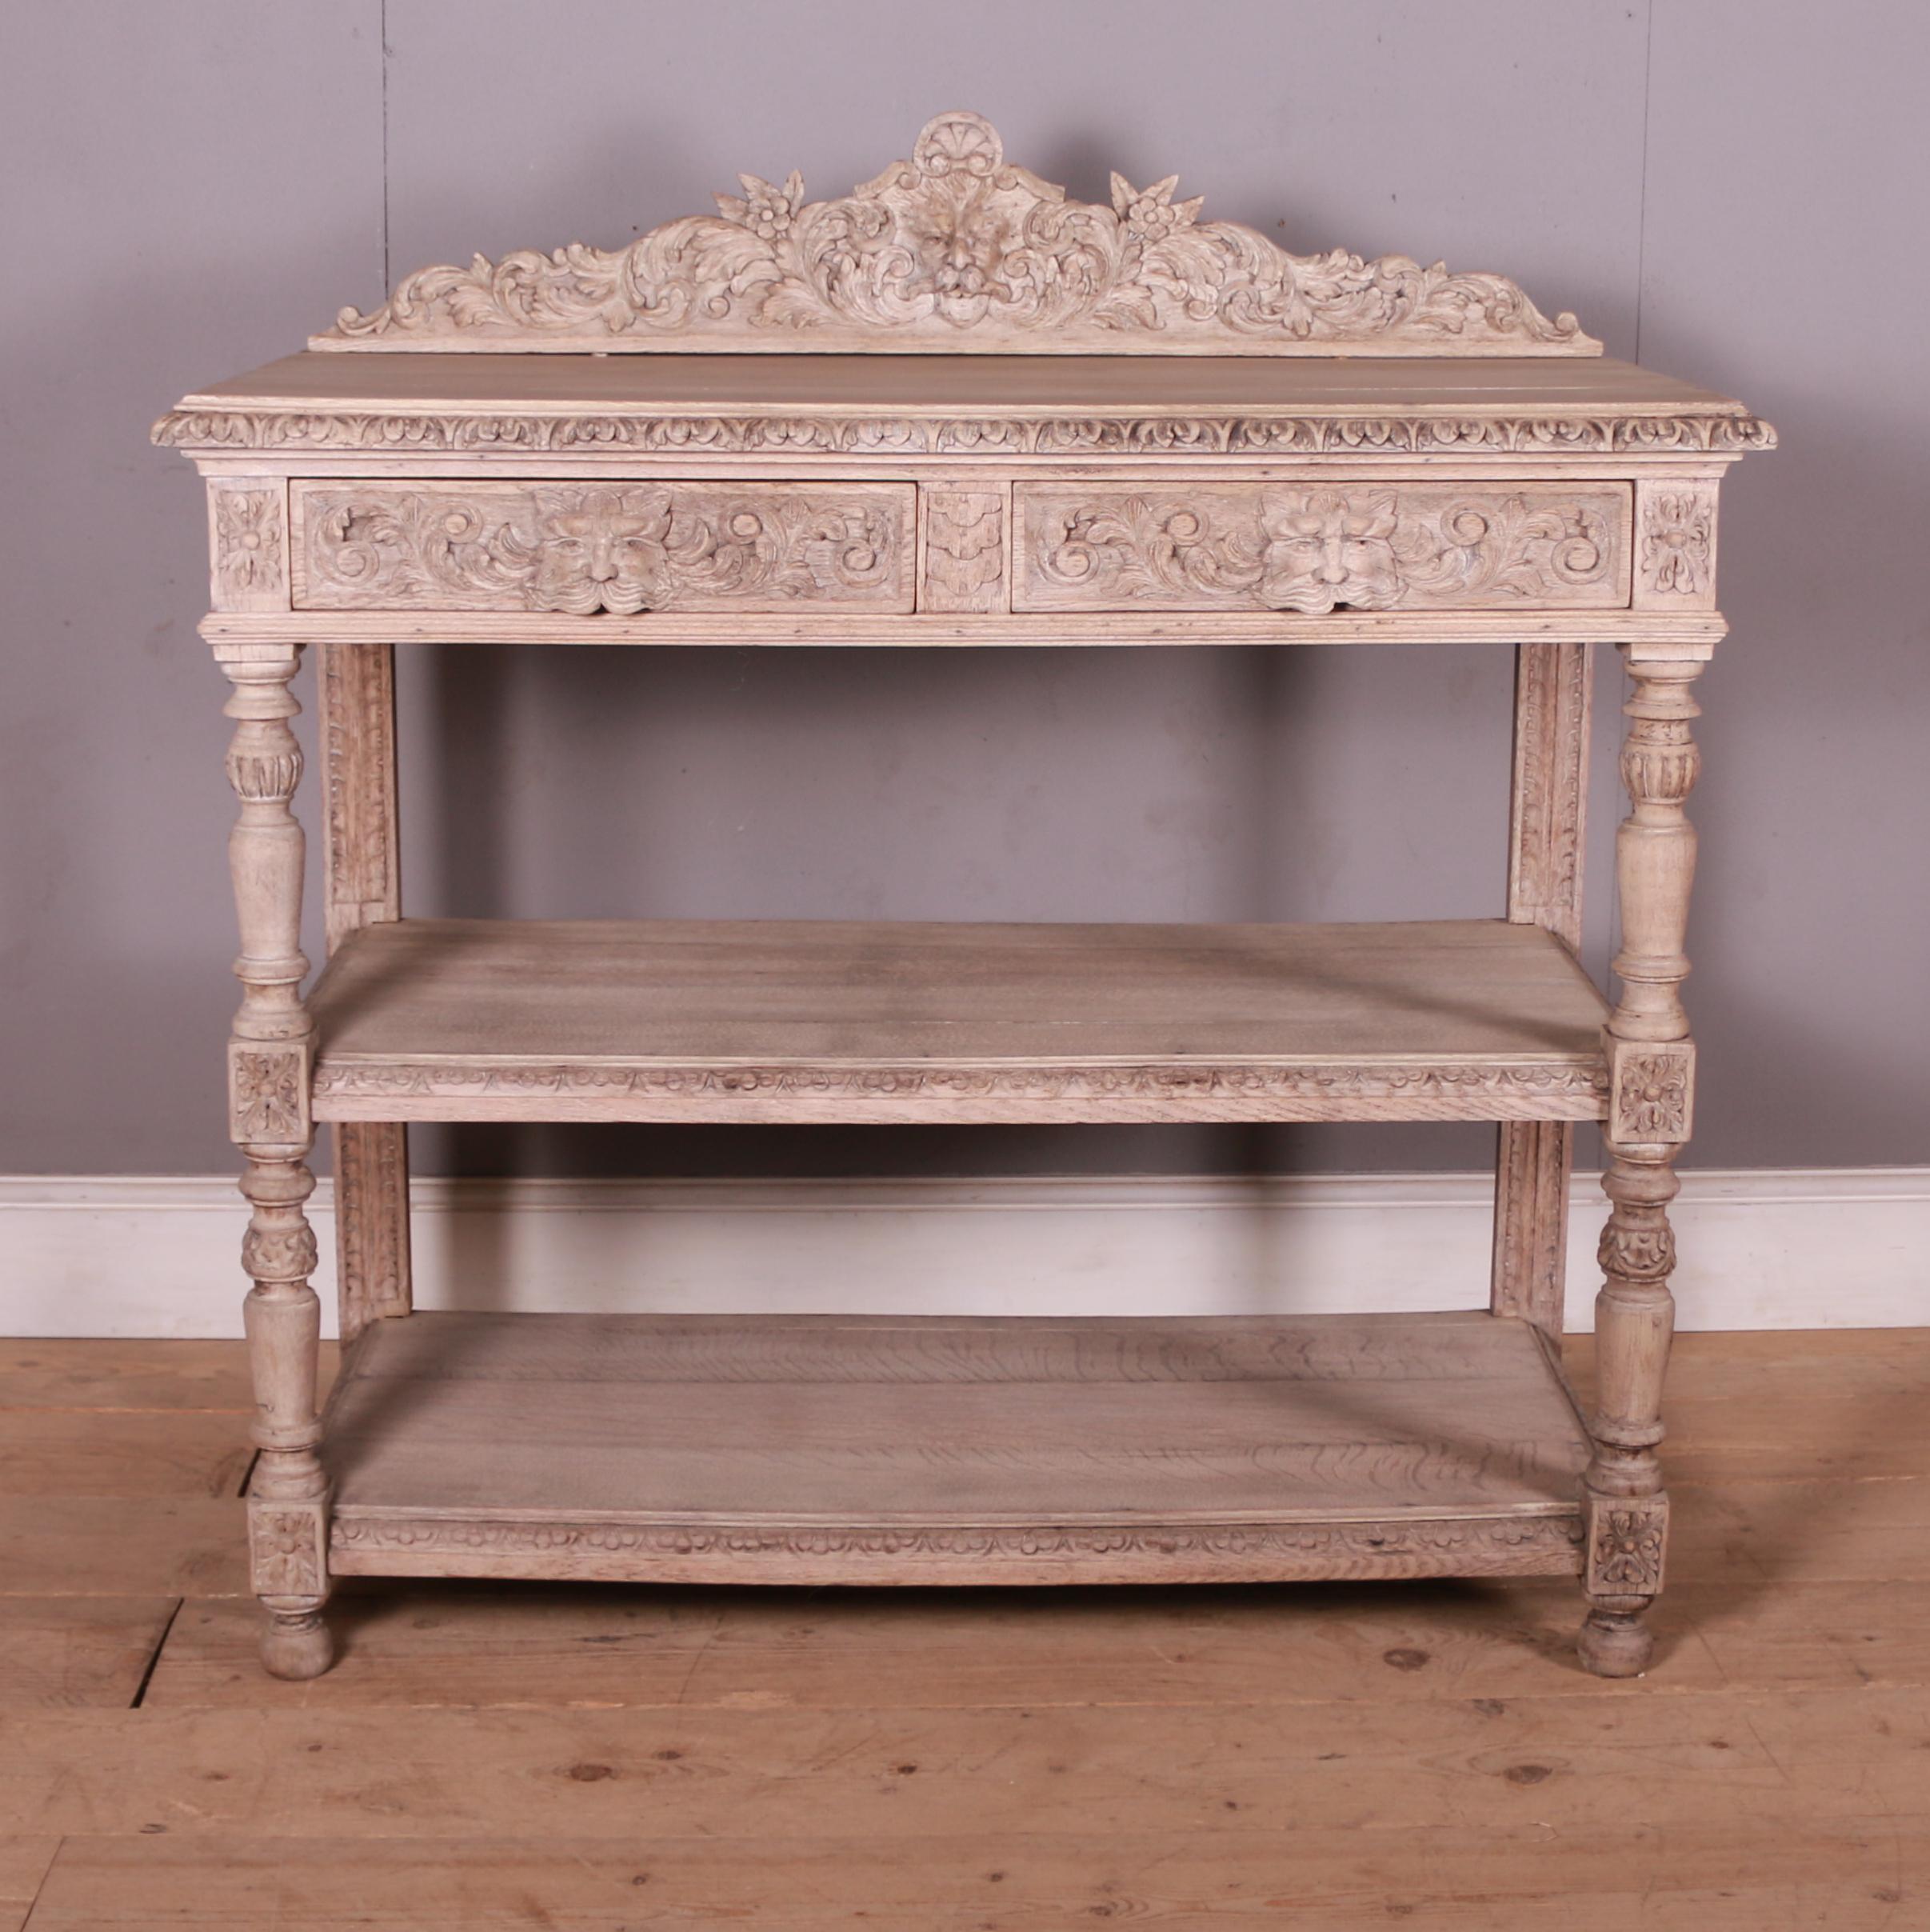 Late 19th C carved and bleached oak English buffet. 1890.

Height to worktop is 40.5